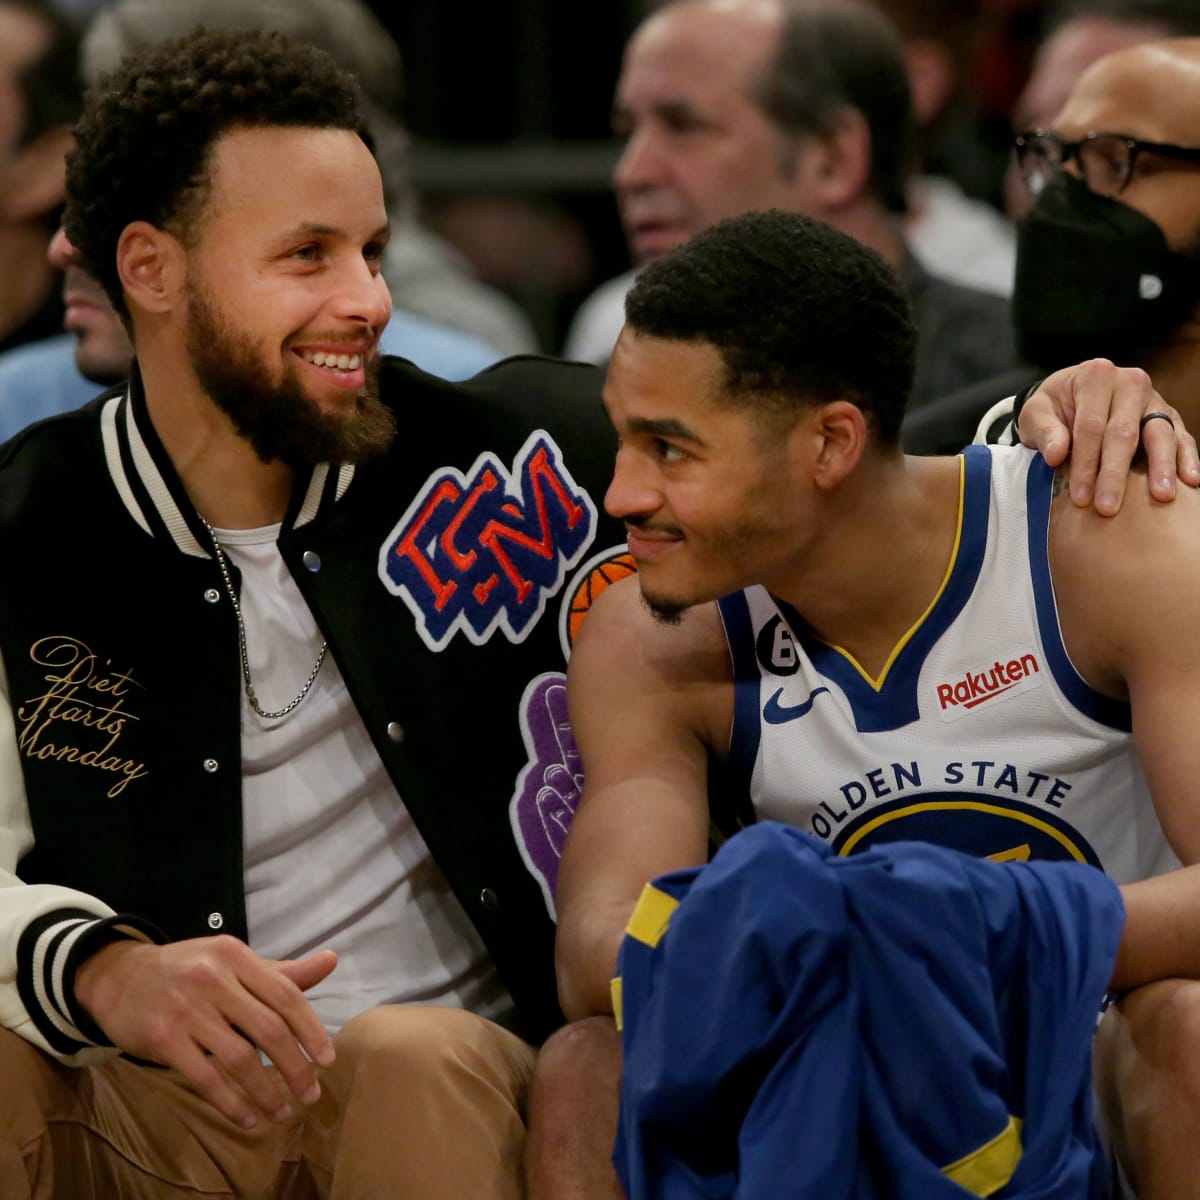 Golden State Warriors: Giving a timetable for Stephen Curry's return